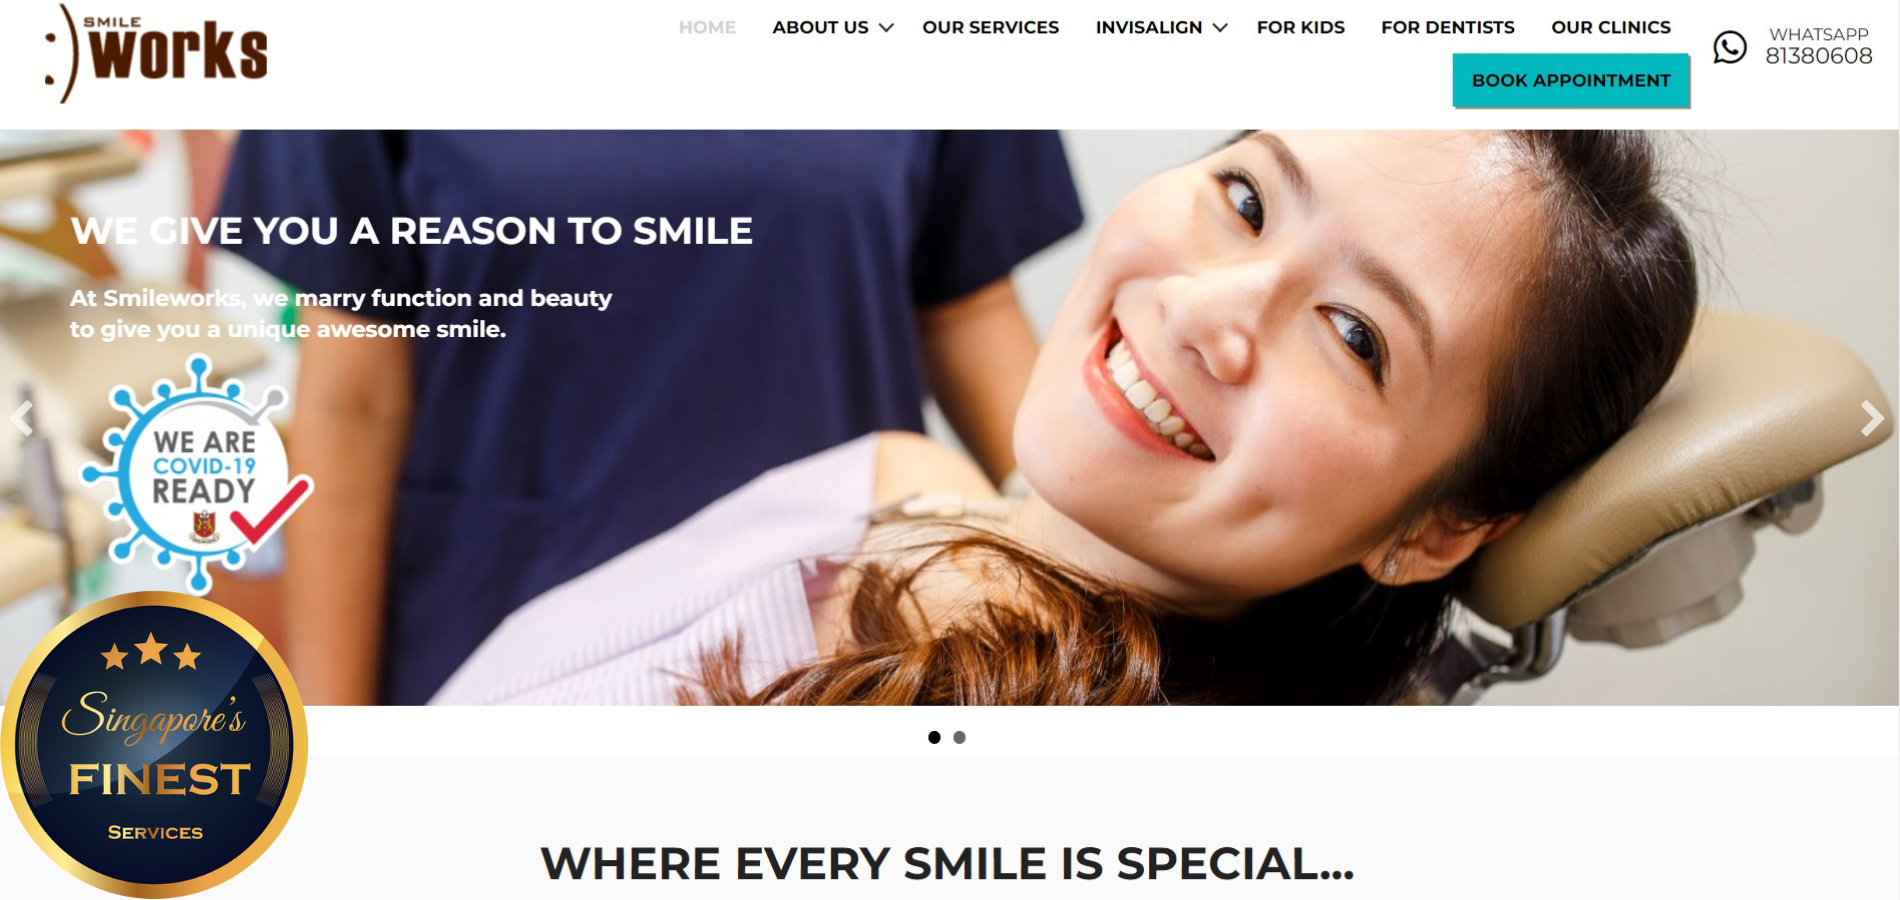 The Finest Dental Clinics for Kids in Singapore